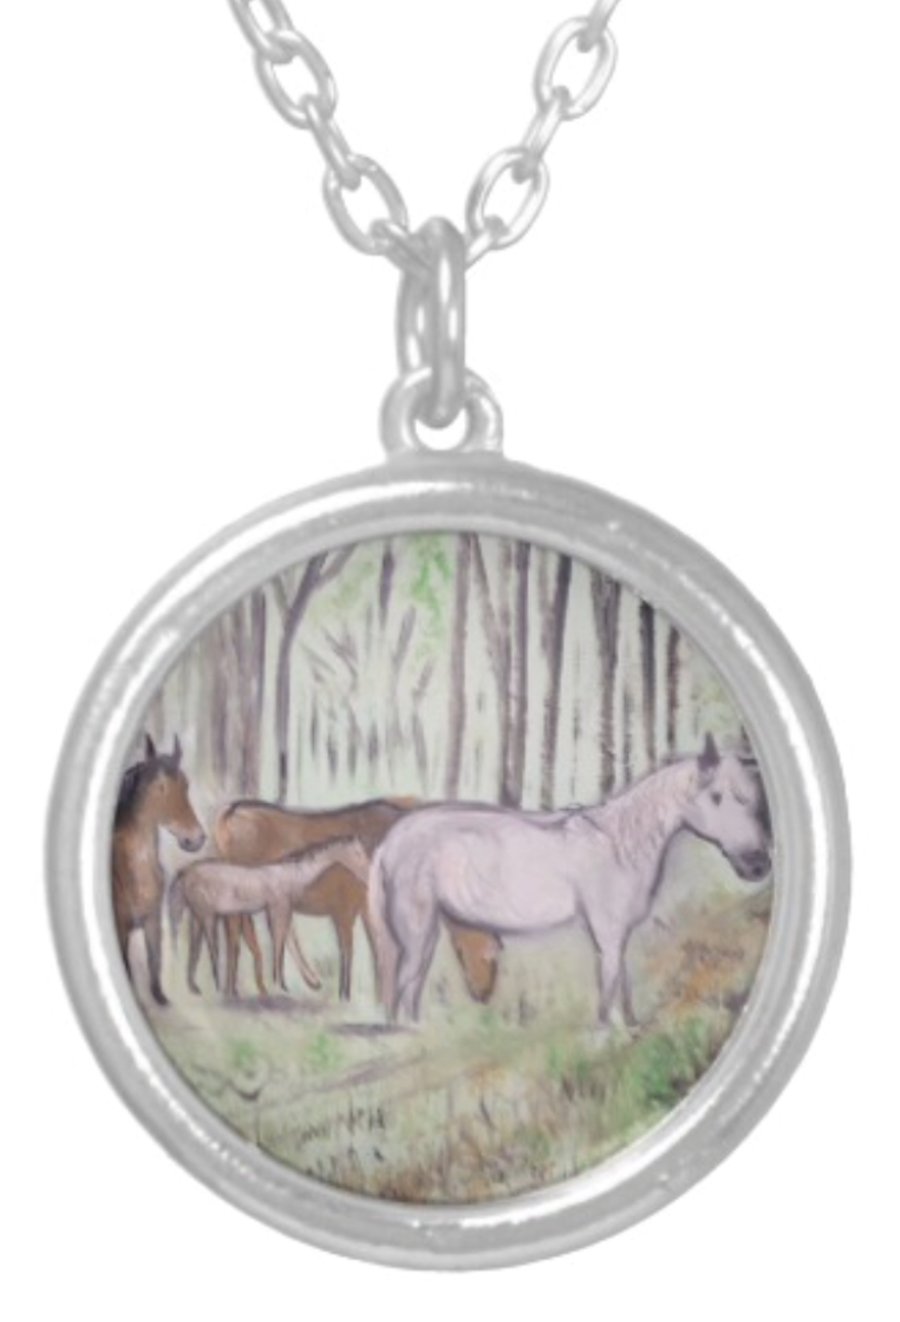 Beautiful Pendant featuring the design ‘Mother Love’